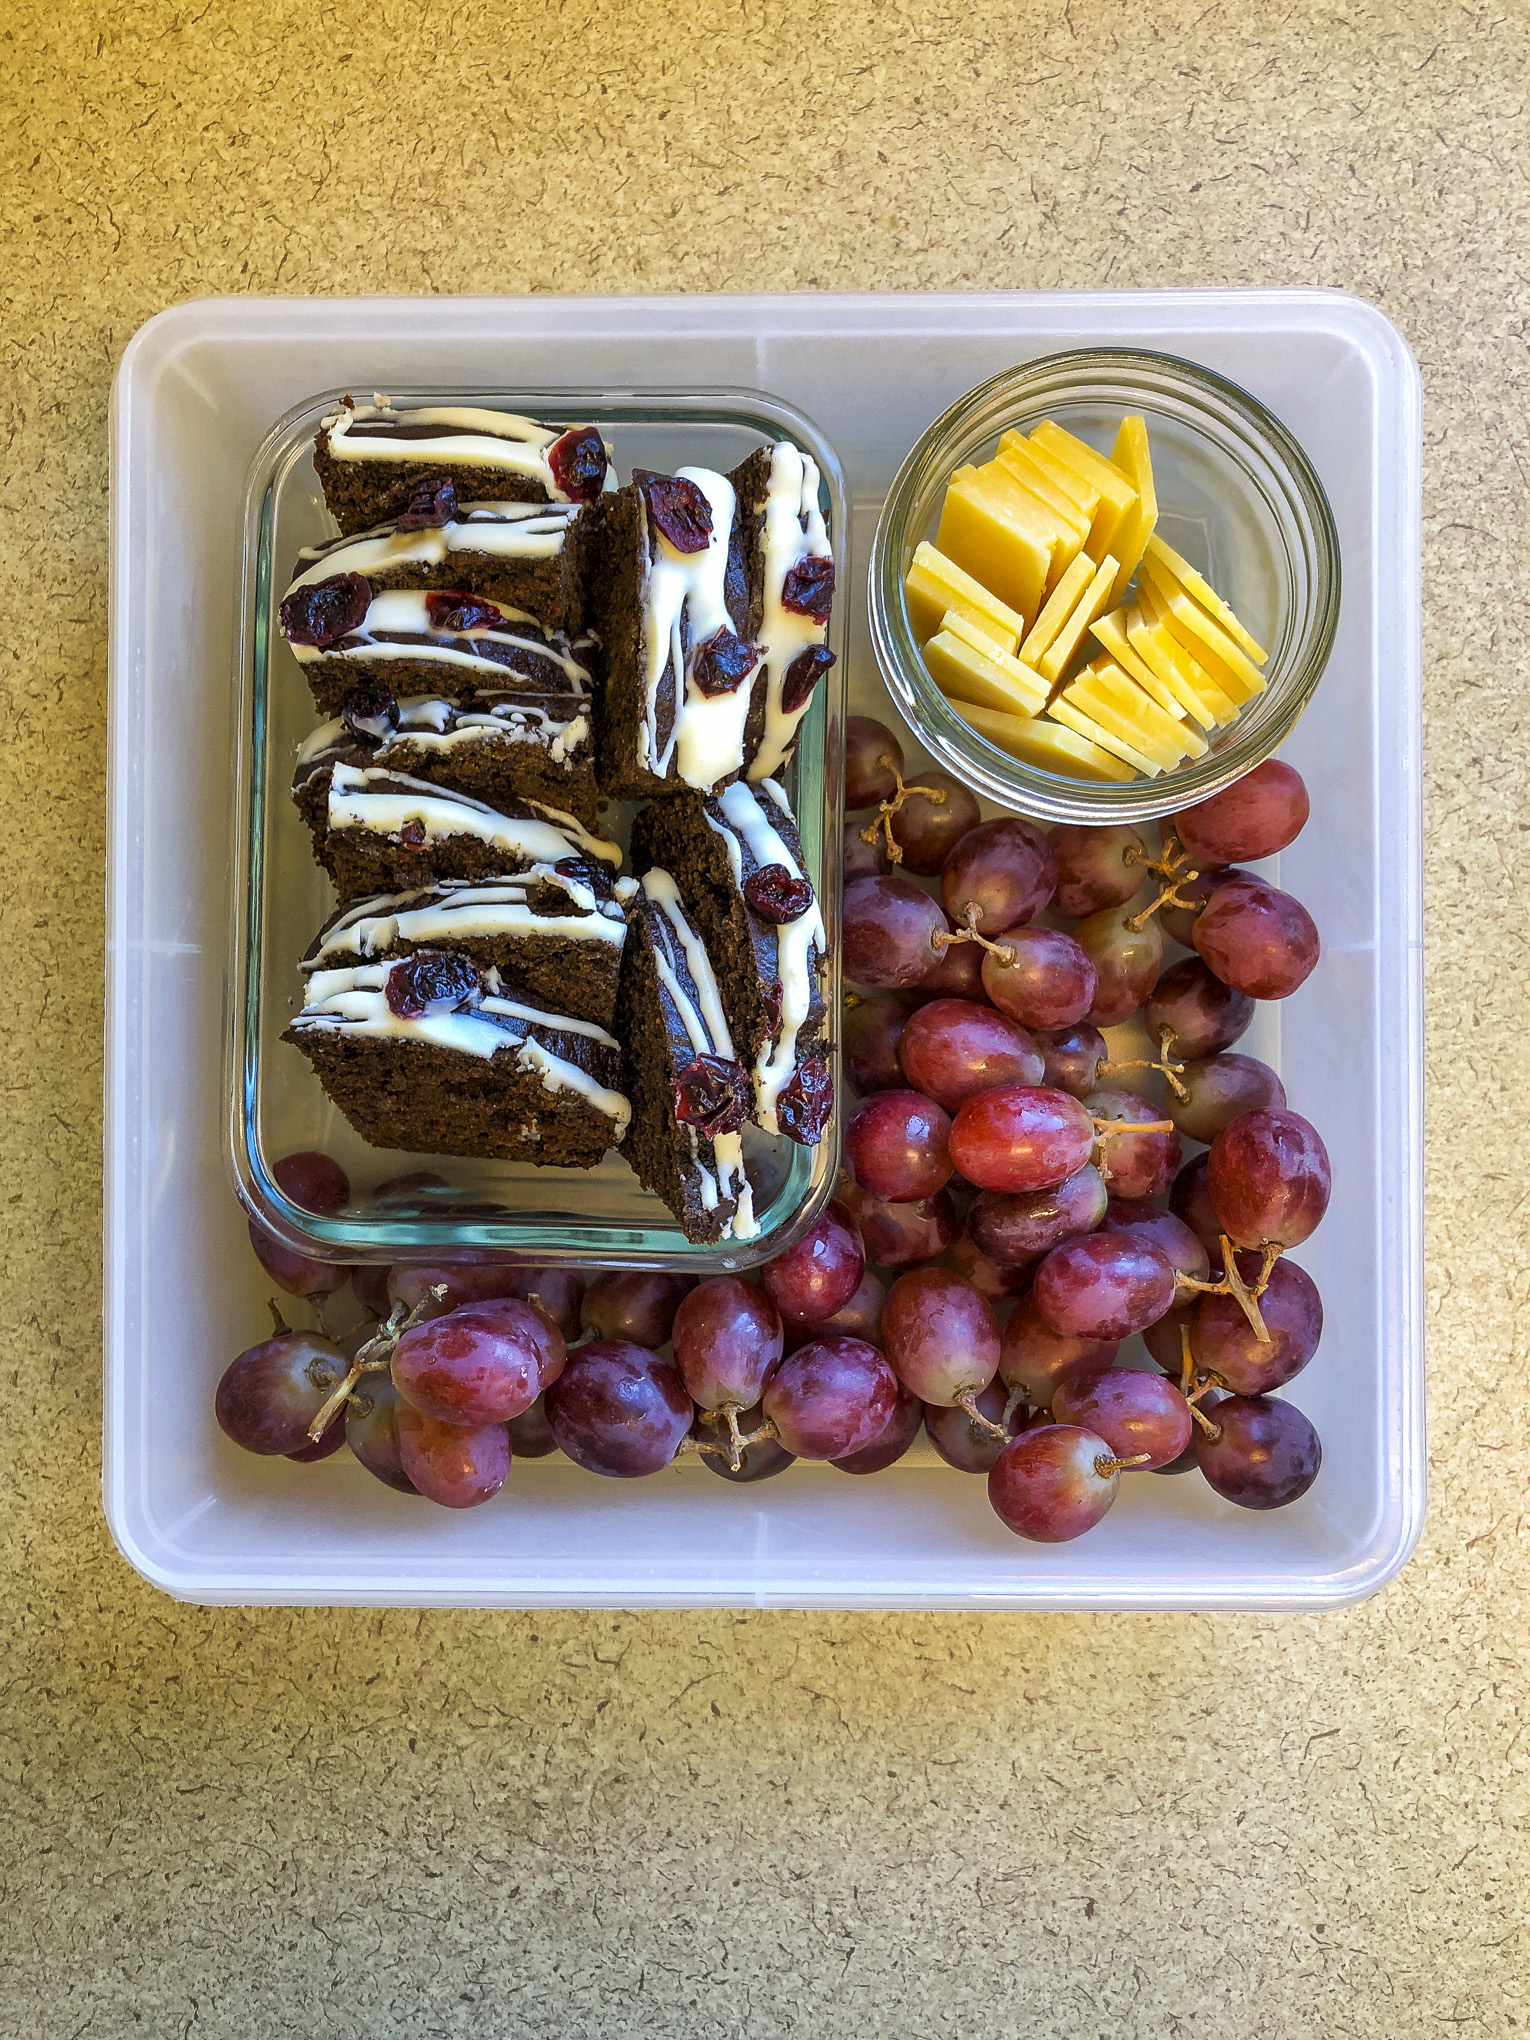 Tupperware filled with gingerbread, cheese and grapes